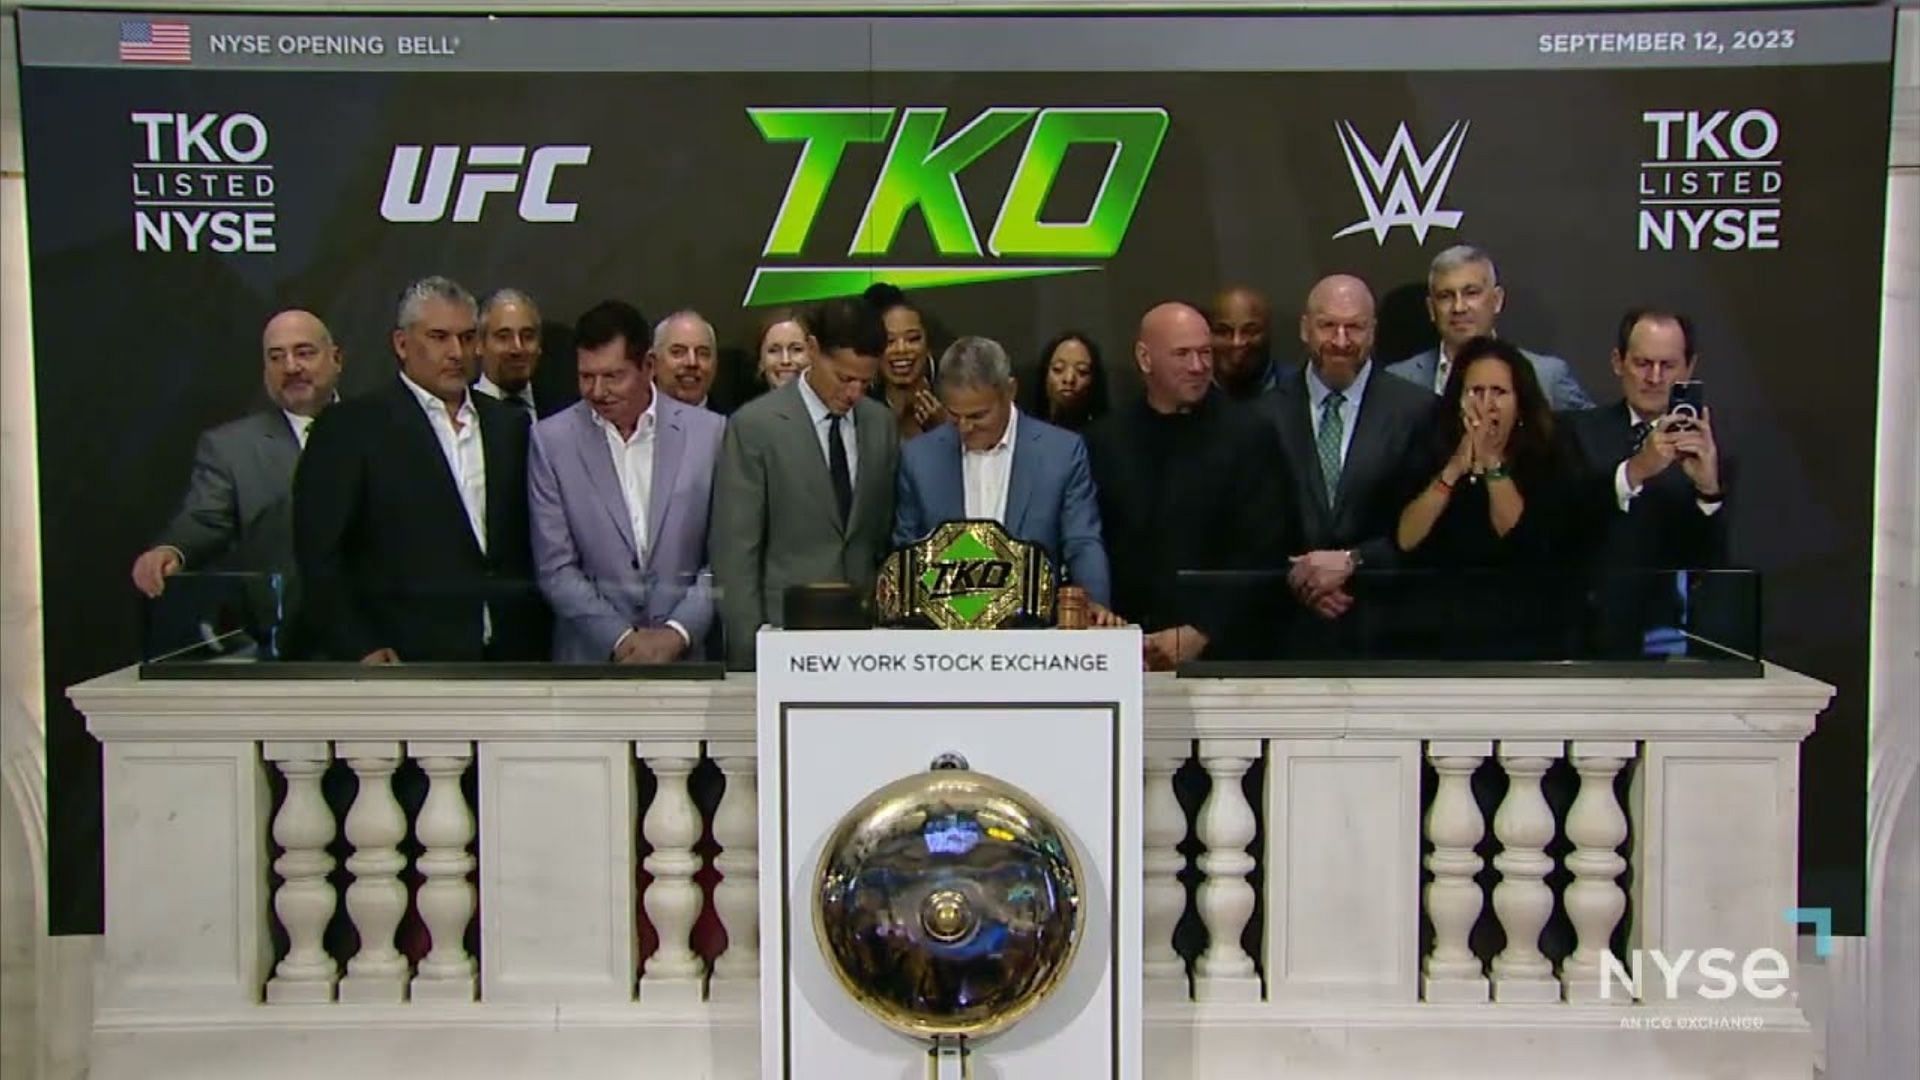 WWE and UFC have merged into TKO Group Holdings on Sept. 12. (Photo: NYSE/YouTube)